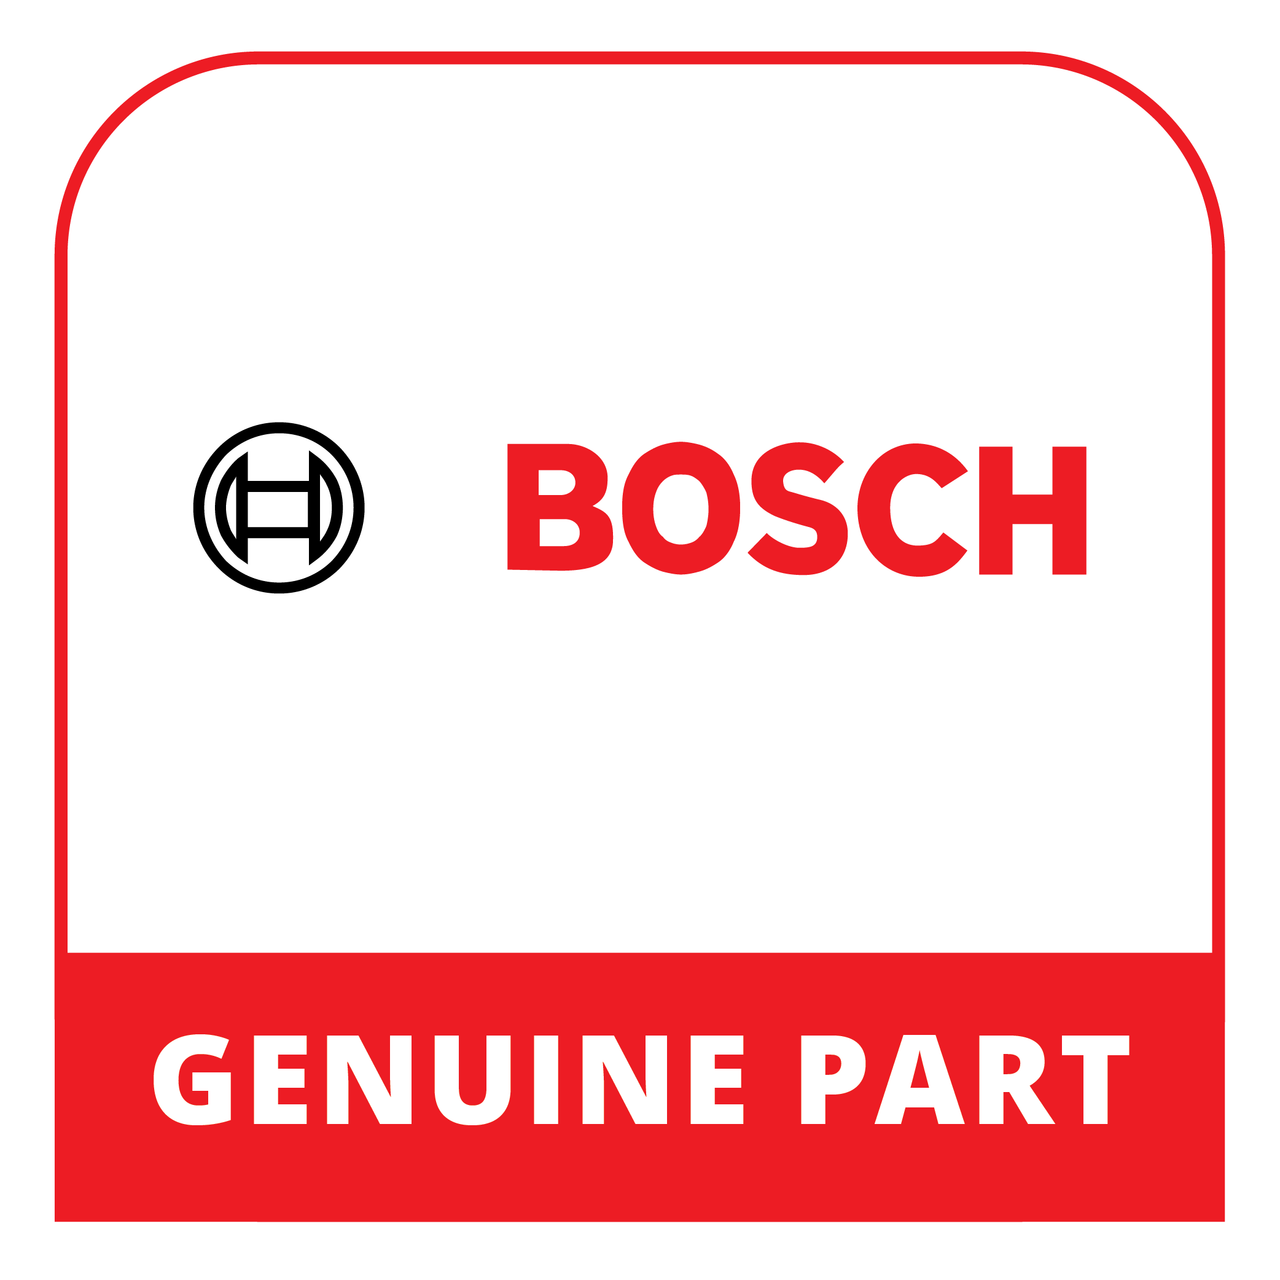 Bosch (Thermador) 20003094 - Cover Sheet - Genuine Bosch (Thermador) Part